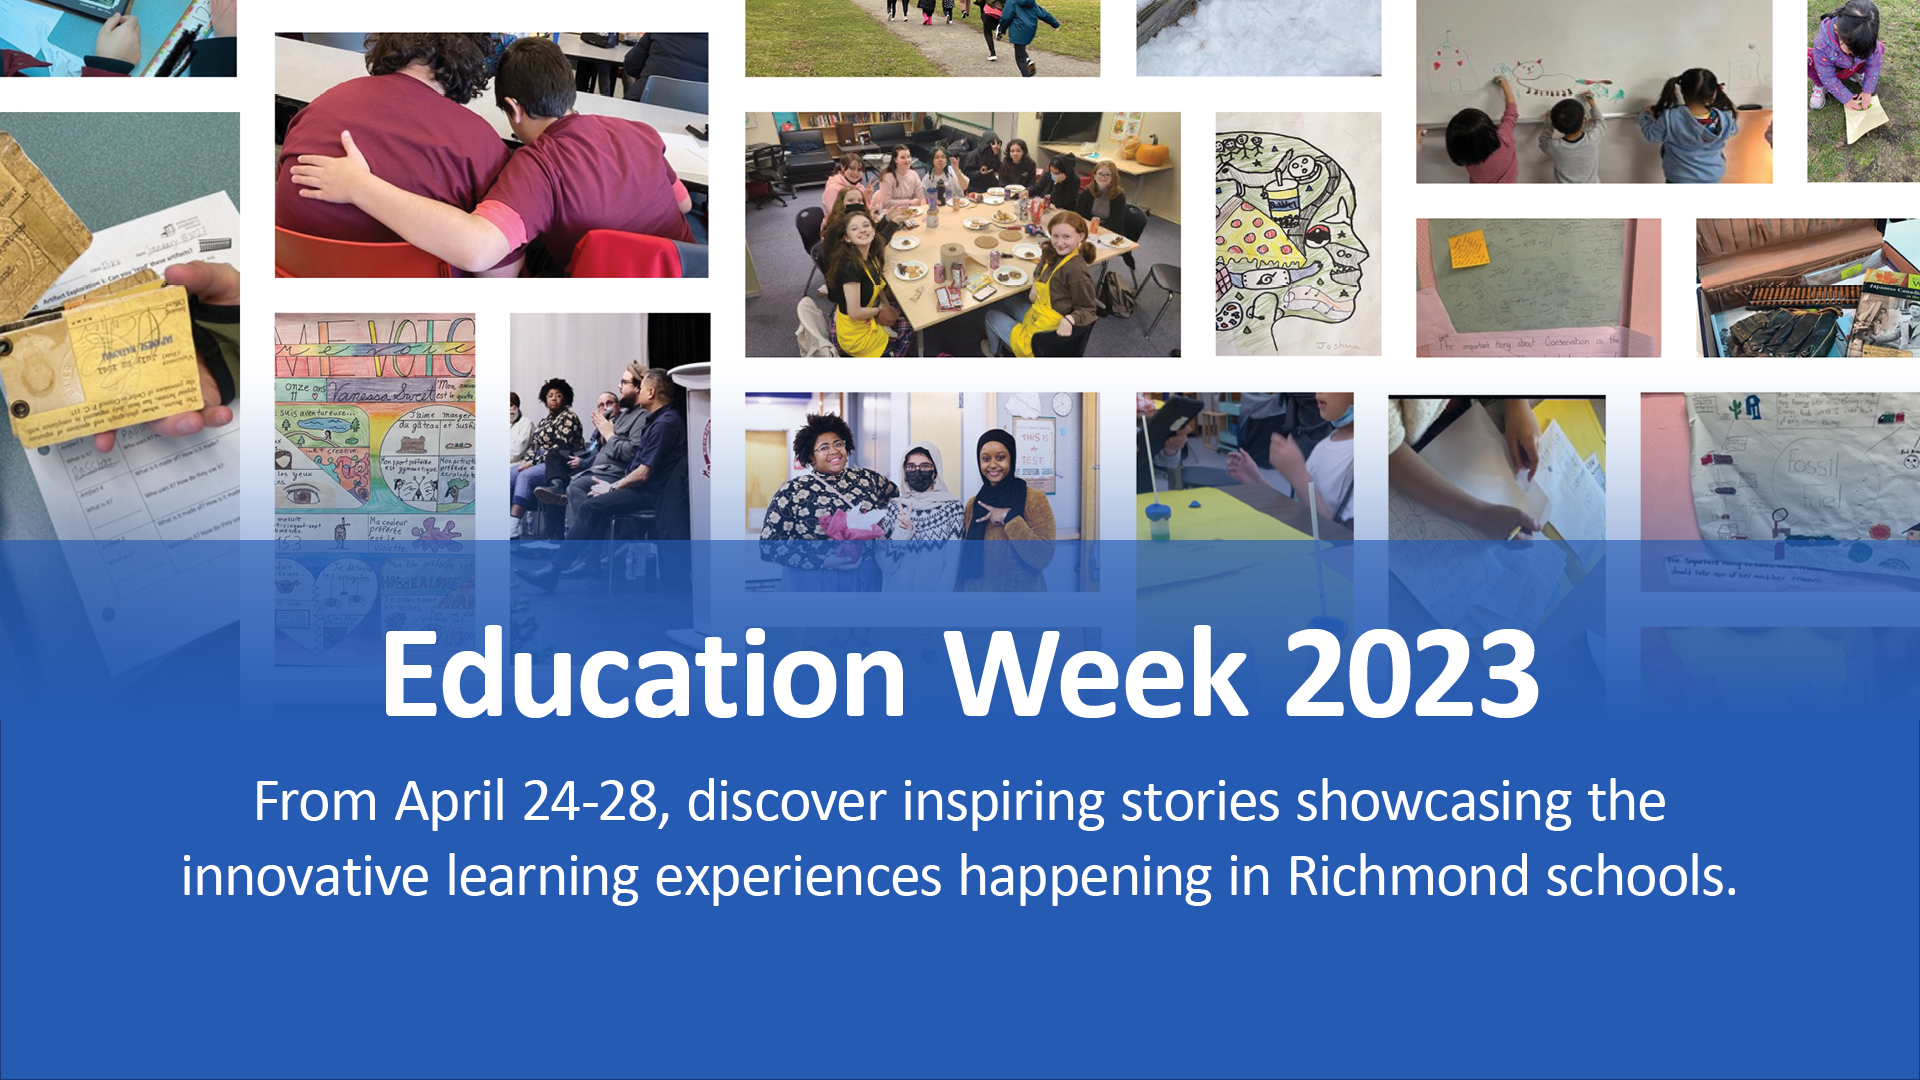 Get ready for Education Week 2023!